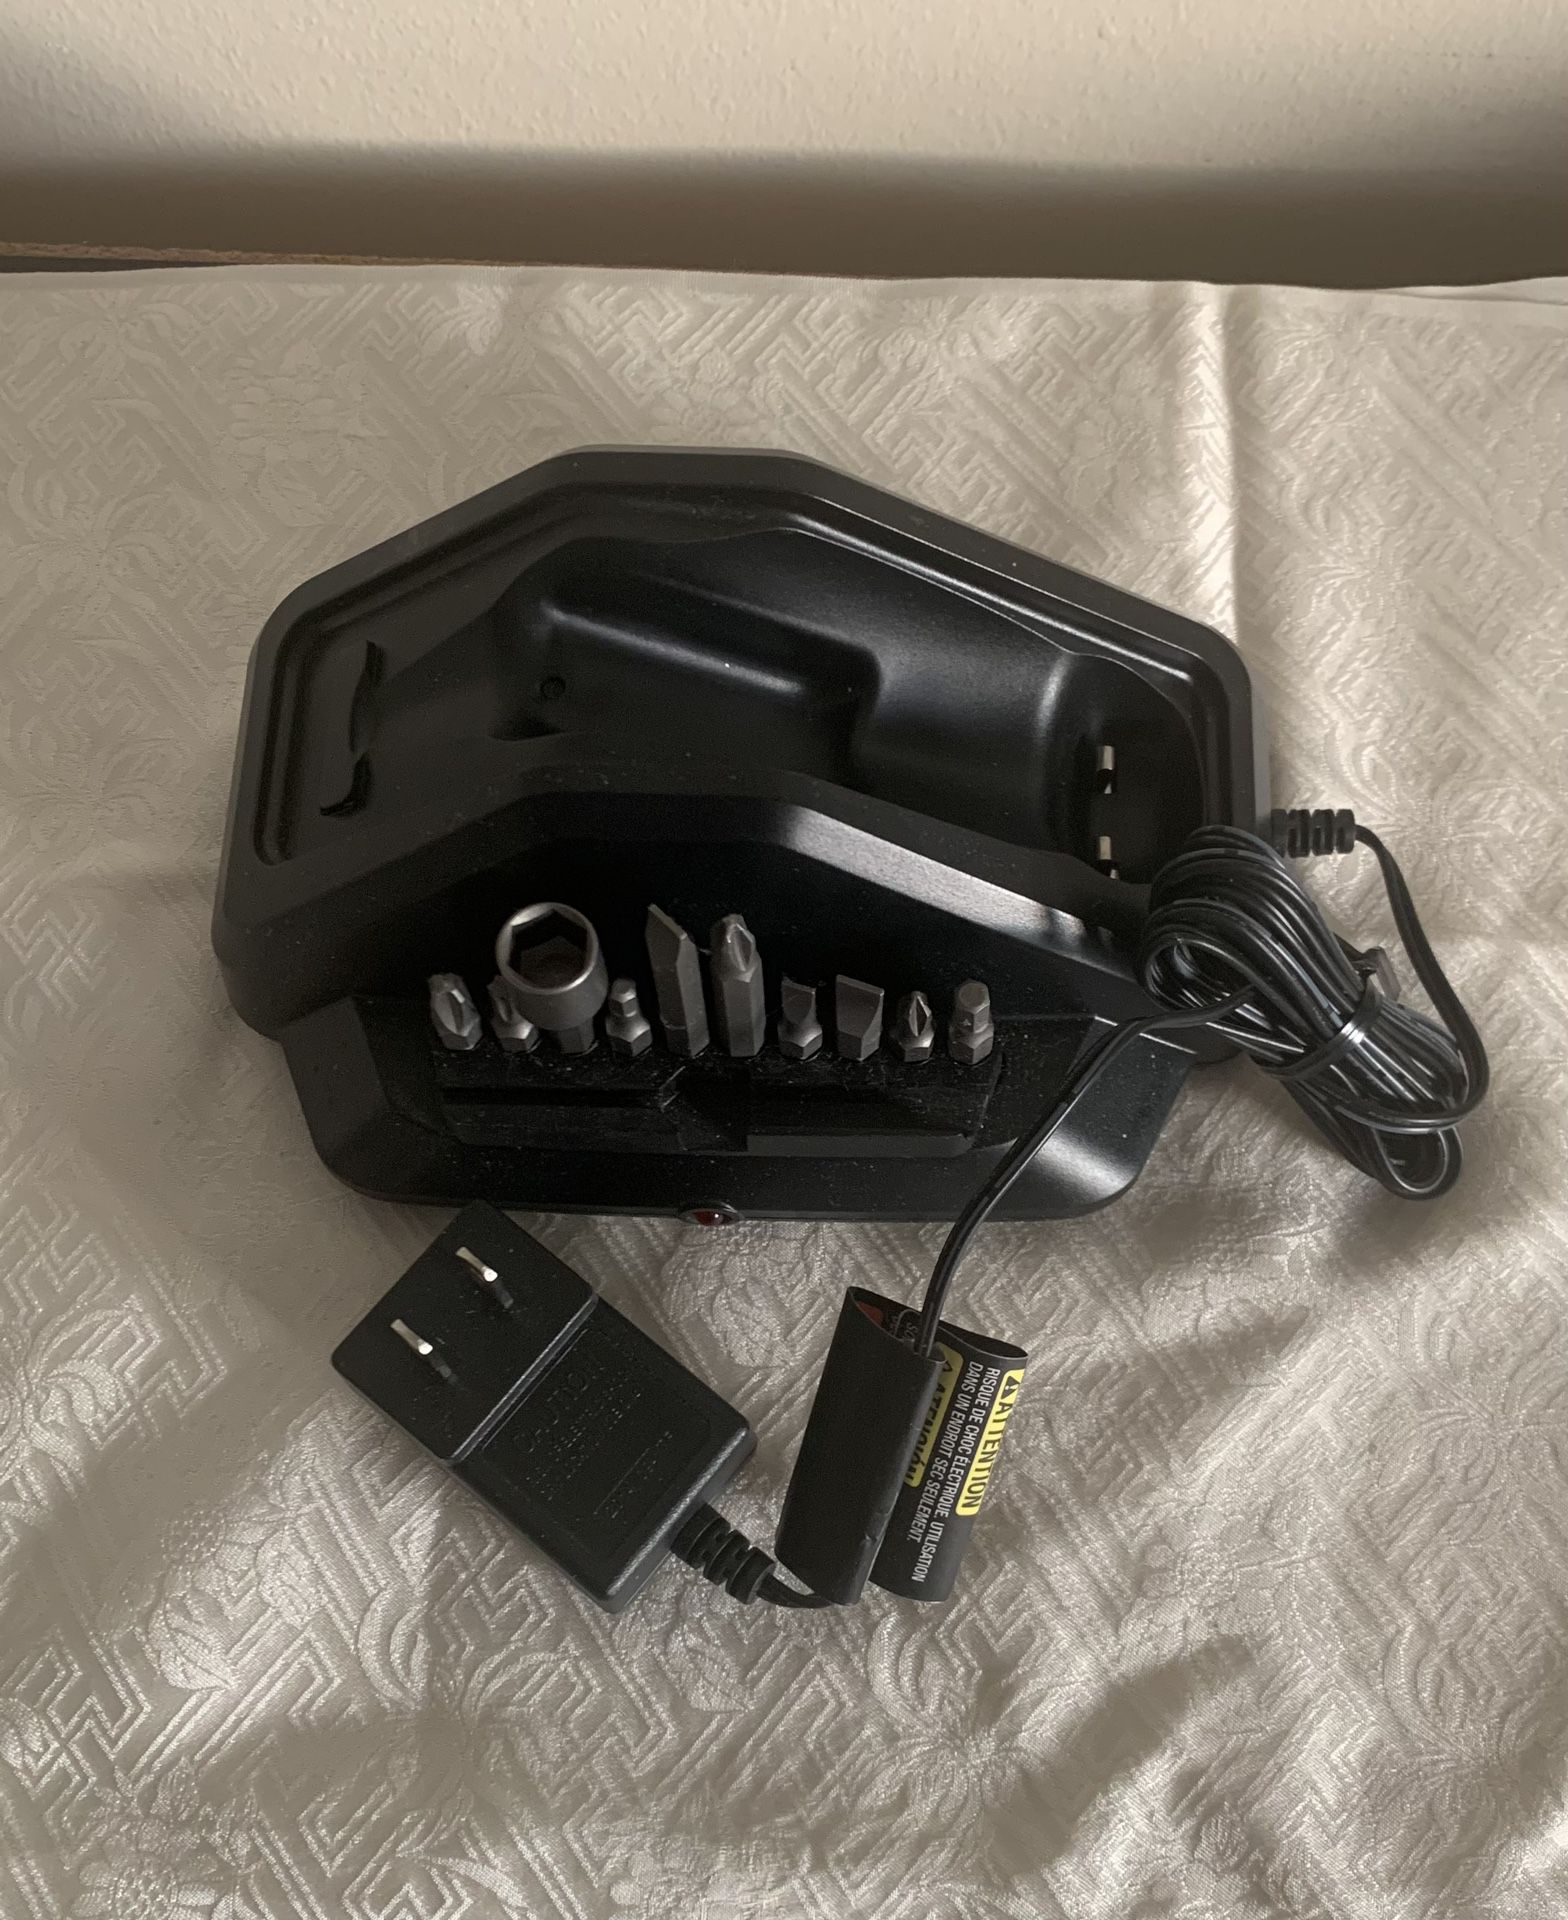 BLACK+DECKER Cordless Screwdriver with Charger Holder for Sale in Downers  Grove, IL - OfferUp